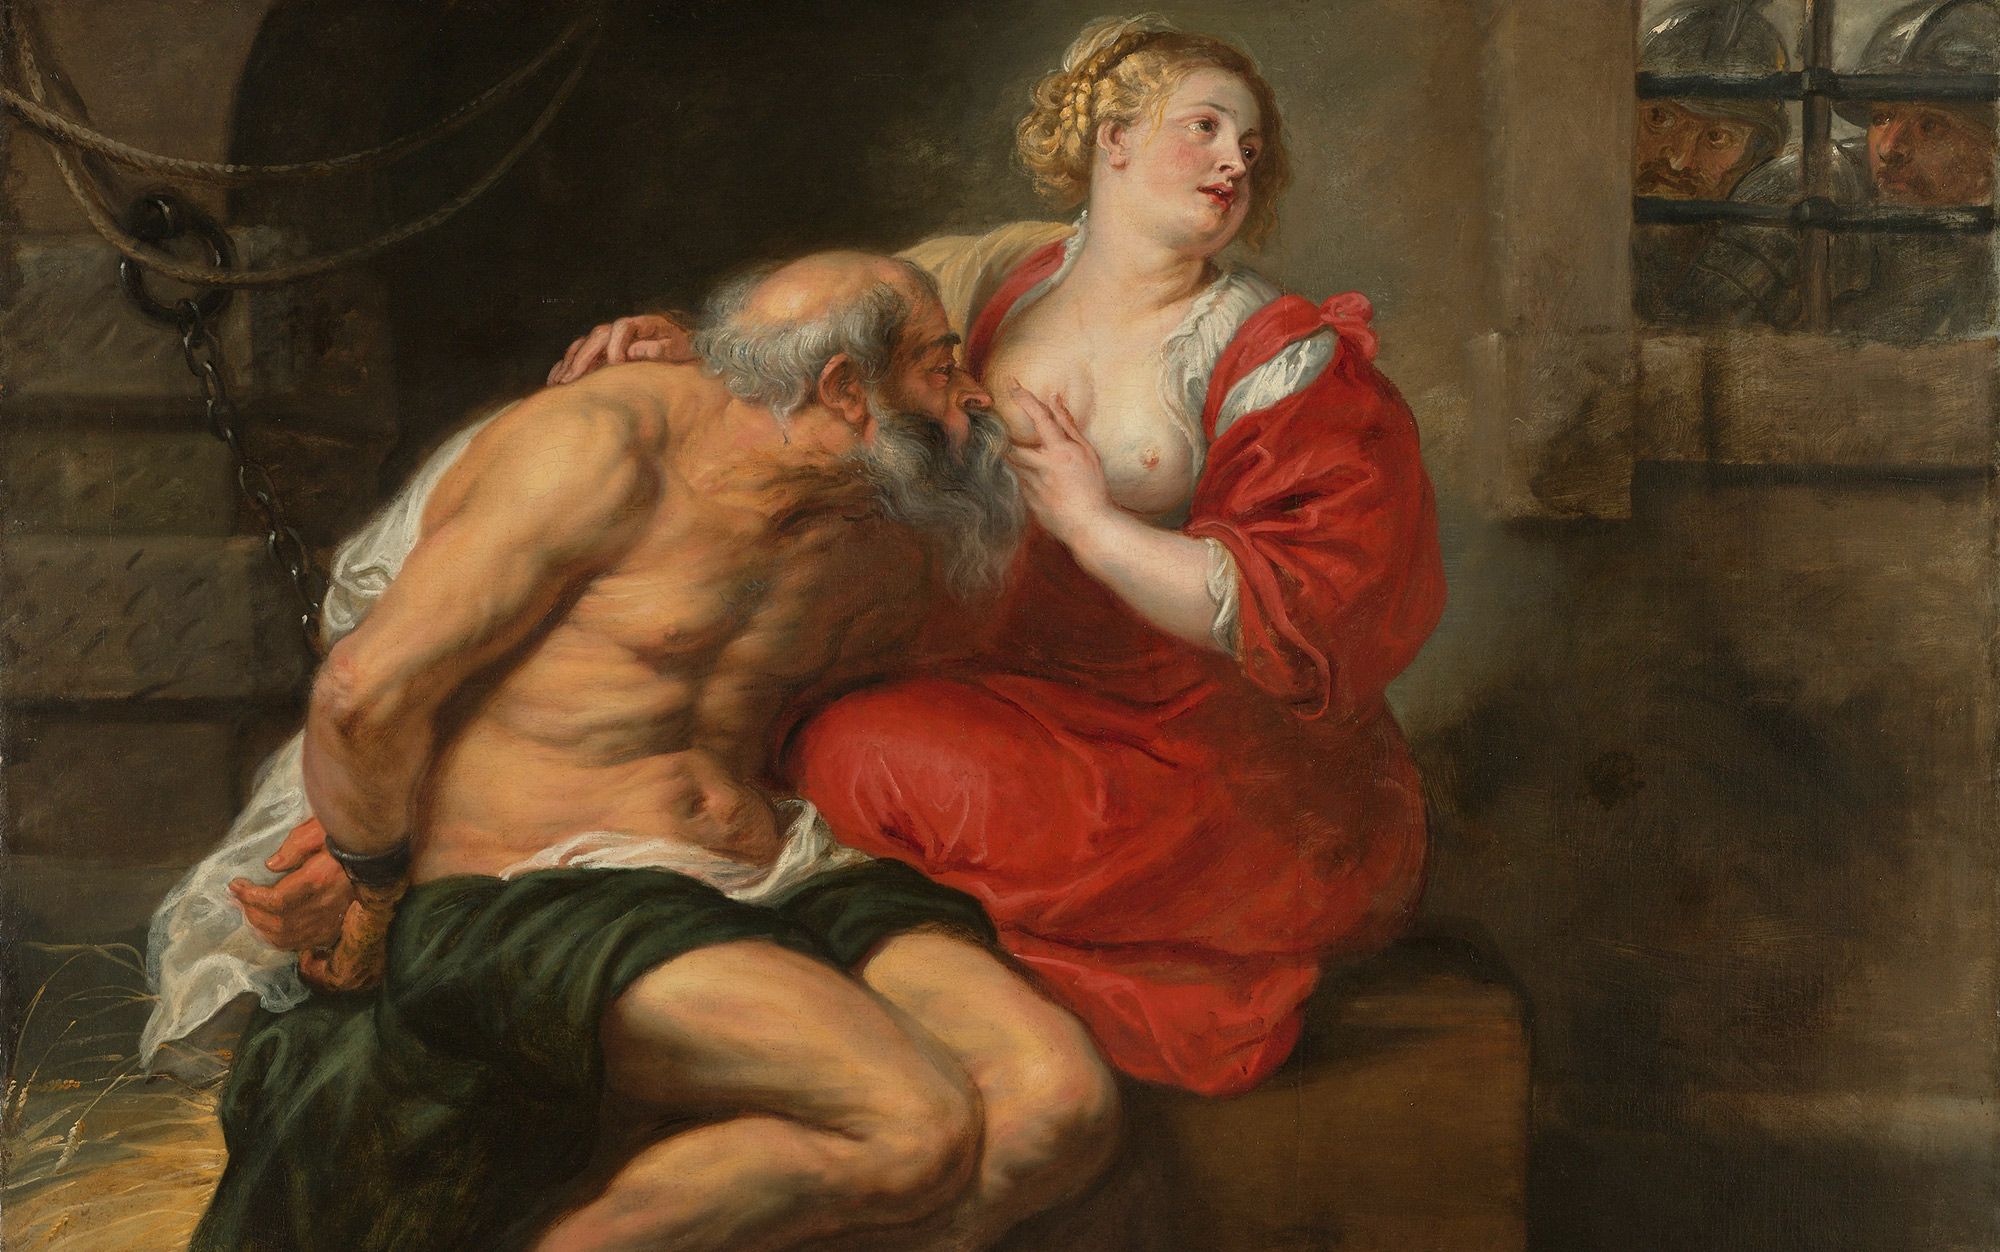 800px x 346px - On Roman Charity, or a woman's filial debt to the patriarchy | Aeon Essays